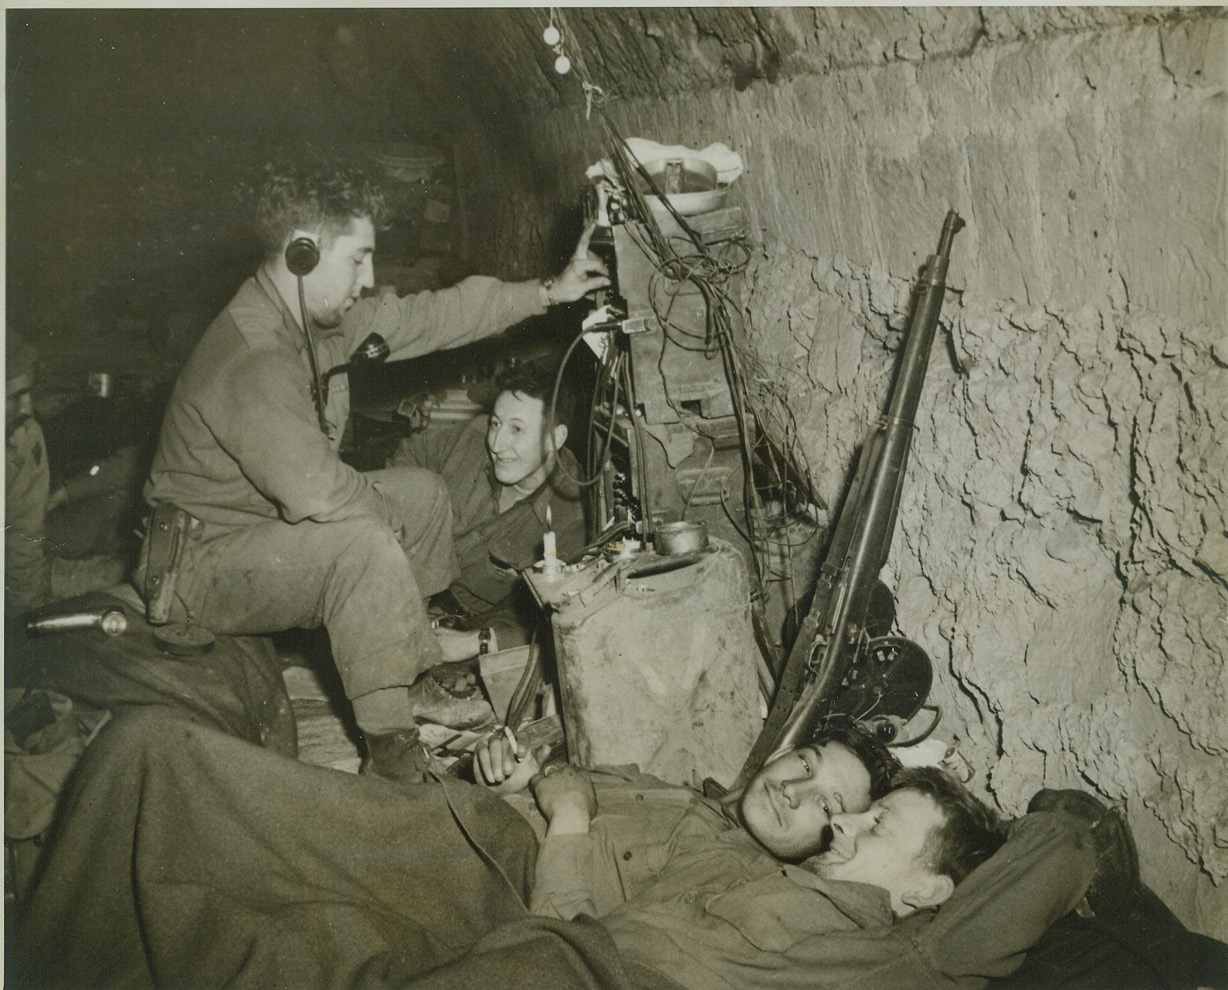 Entertainment Courtesy A. Hitler, 12/19/1943. MIGNANO, ITALY -- A German radio, found on a battlefield, provides entertainment for these American soldiers as they "bivouac" in an old wine cellar (minus the wine) in Mignano, after their battle for the Italian town. At the switchboard is Pfc. Howard L. Saddler of Canton, Ohio. Pvt. Theodore Zembuiski of Albany, NY, lounges in background, while (left to right) Pvt. Thomas G. Cross of Buffalo Gap, Texas, and Pfc. Norman S. Roy of Baltimore, MD., lie in foreground. Credit: (ACME);